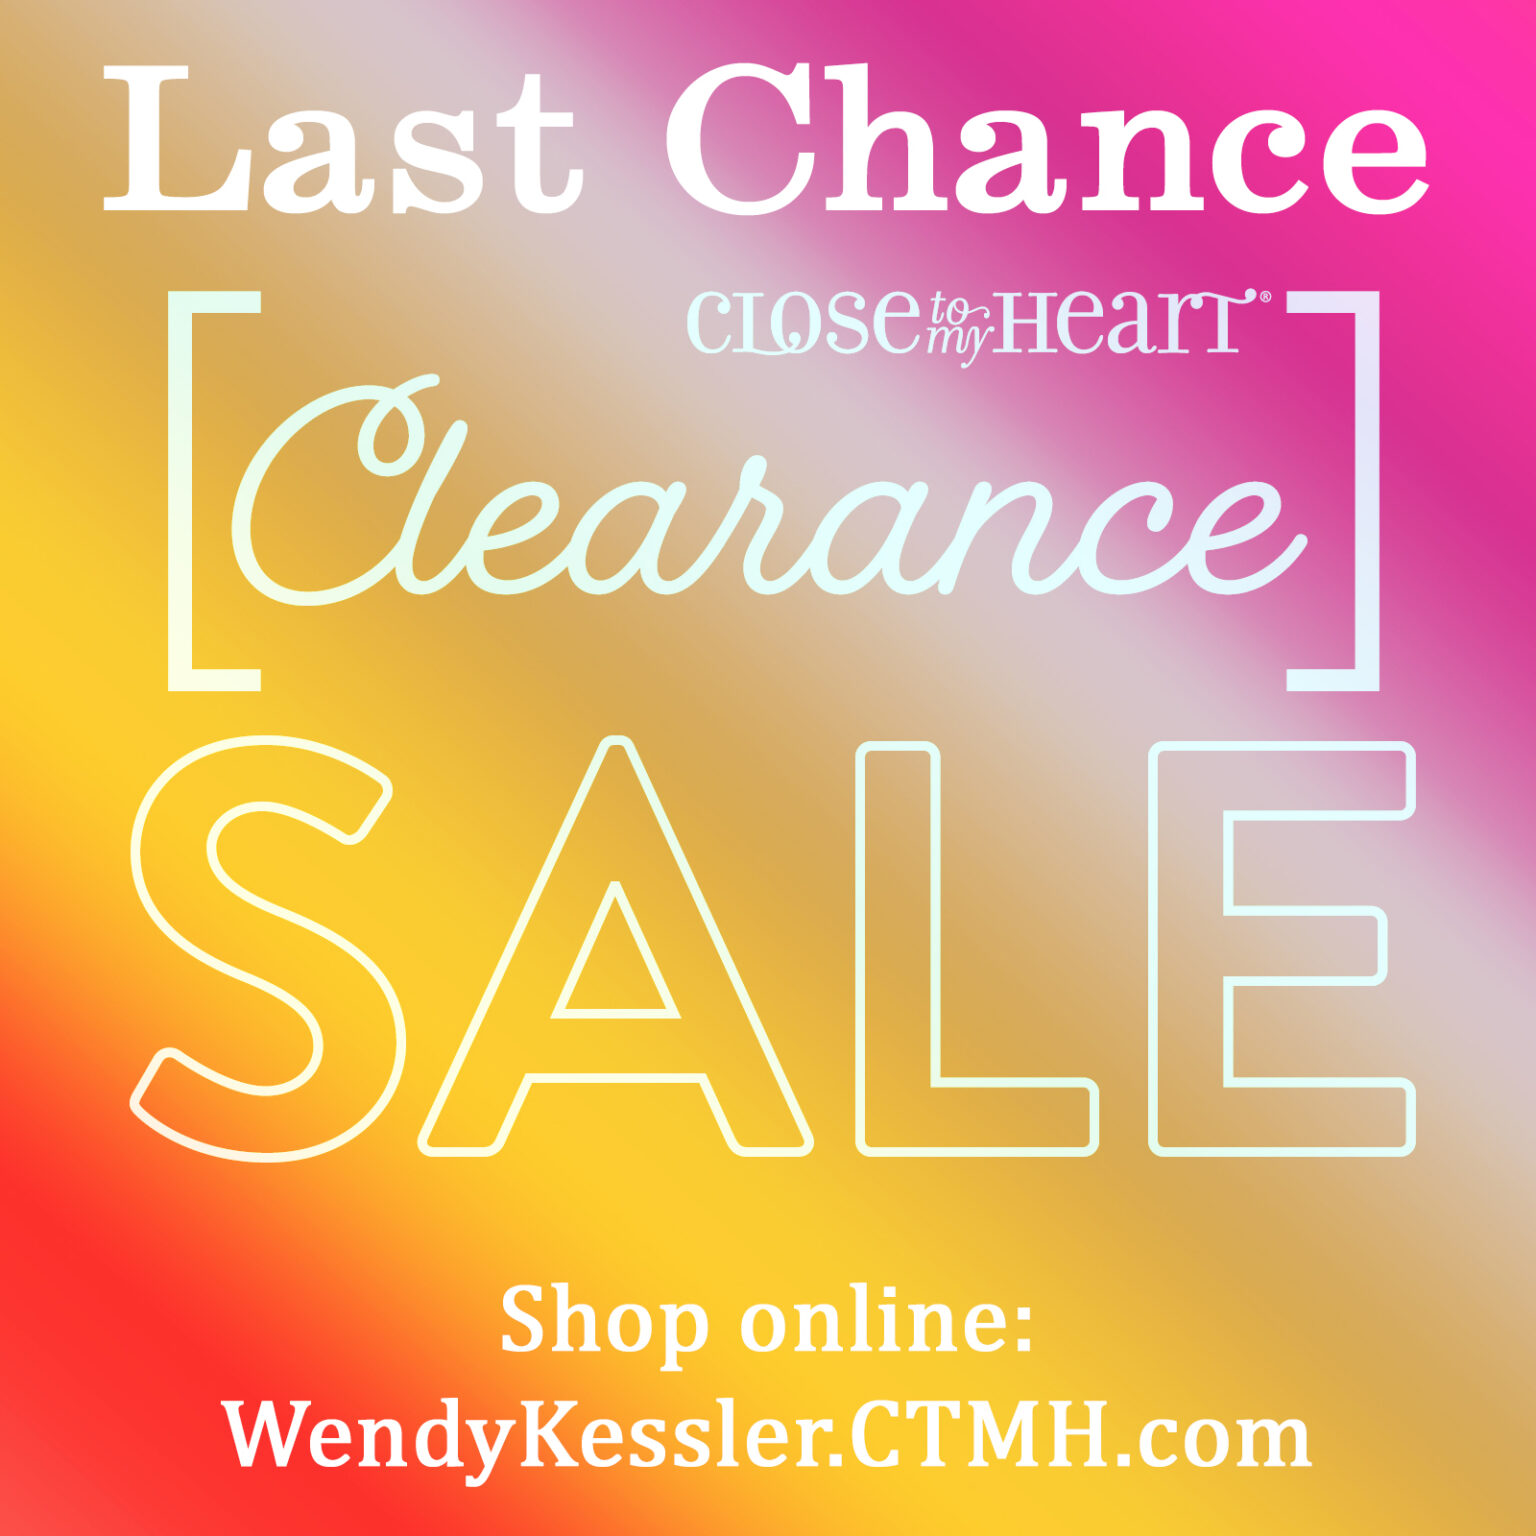 CLEARANCE - Up to 80% OFF Last Chance Styles